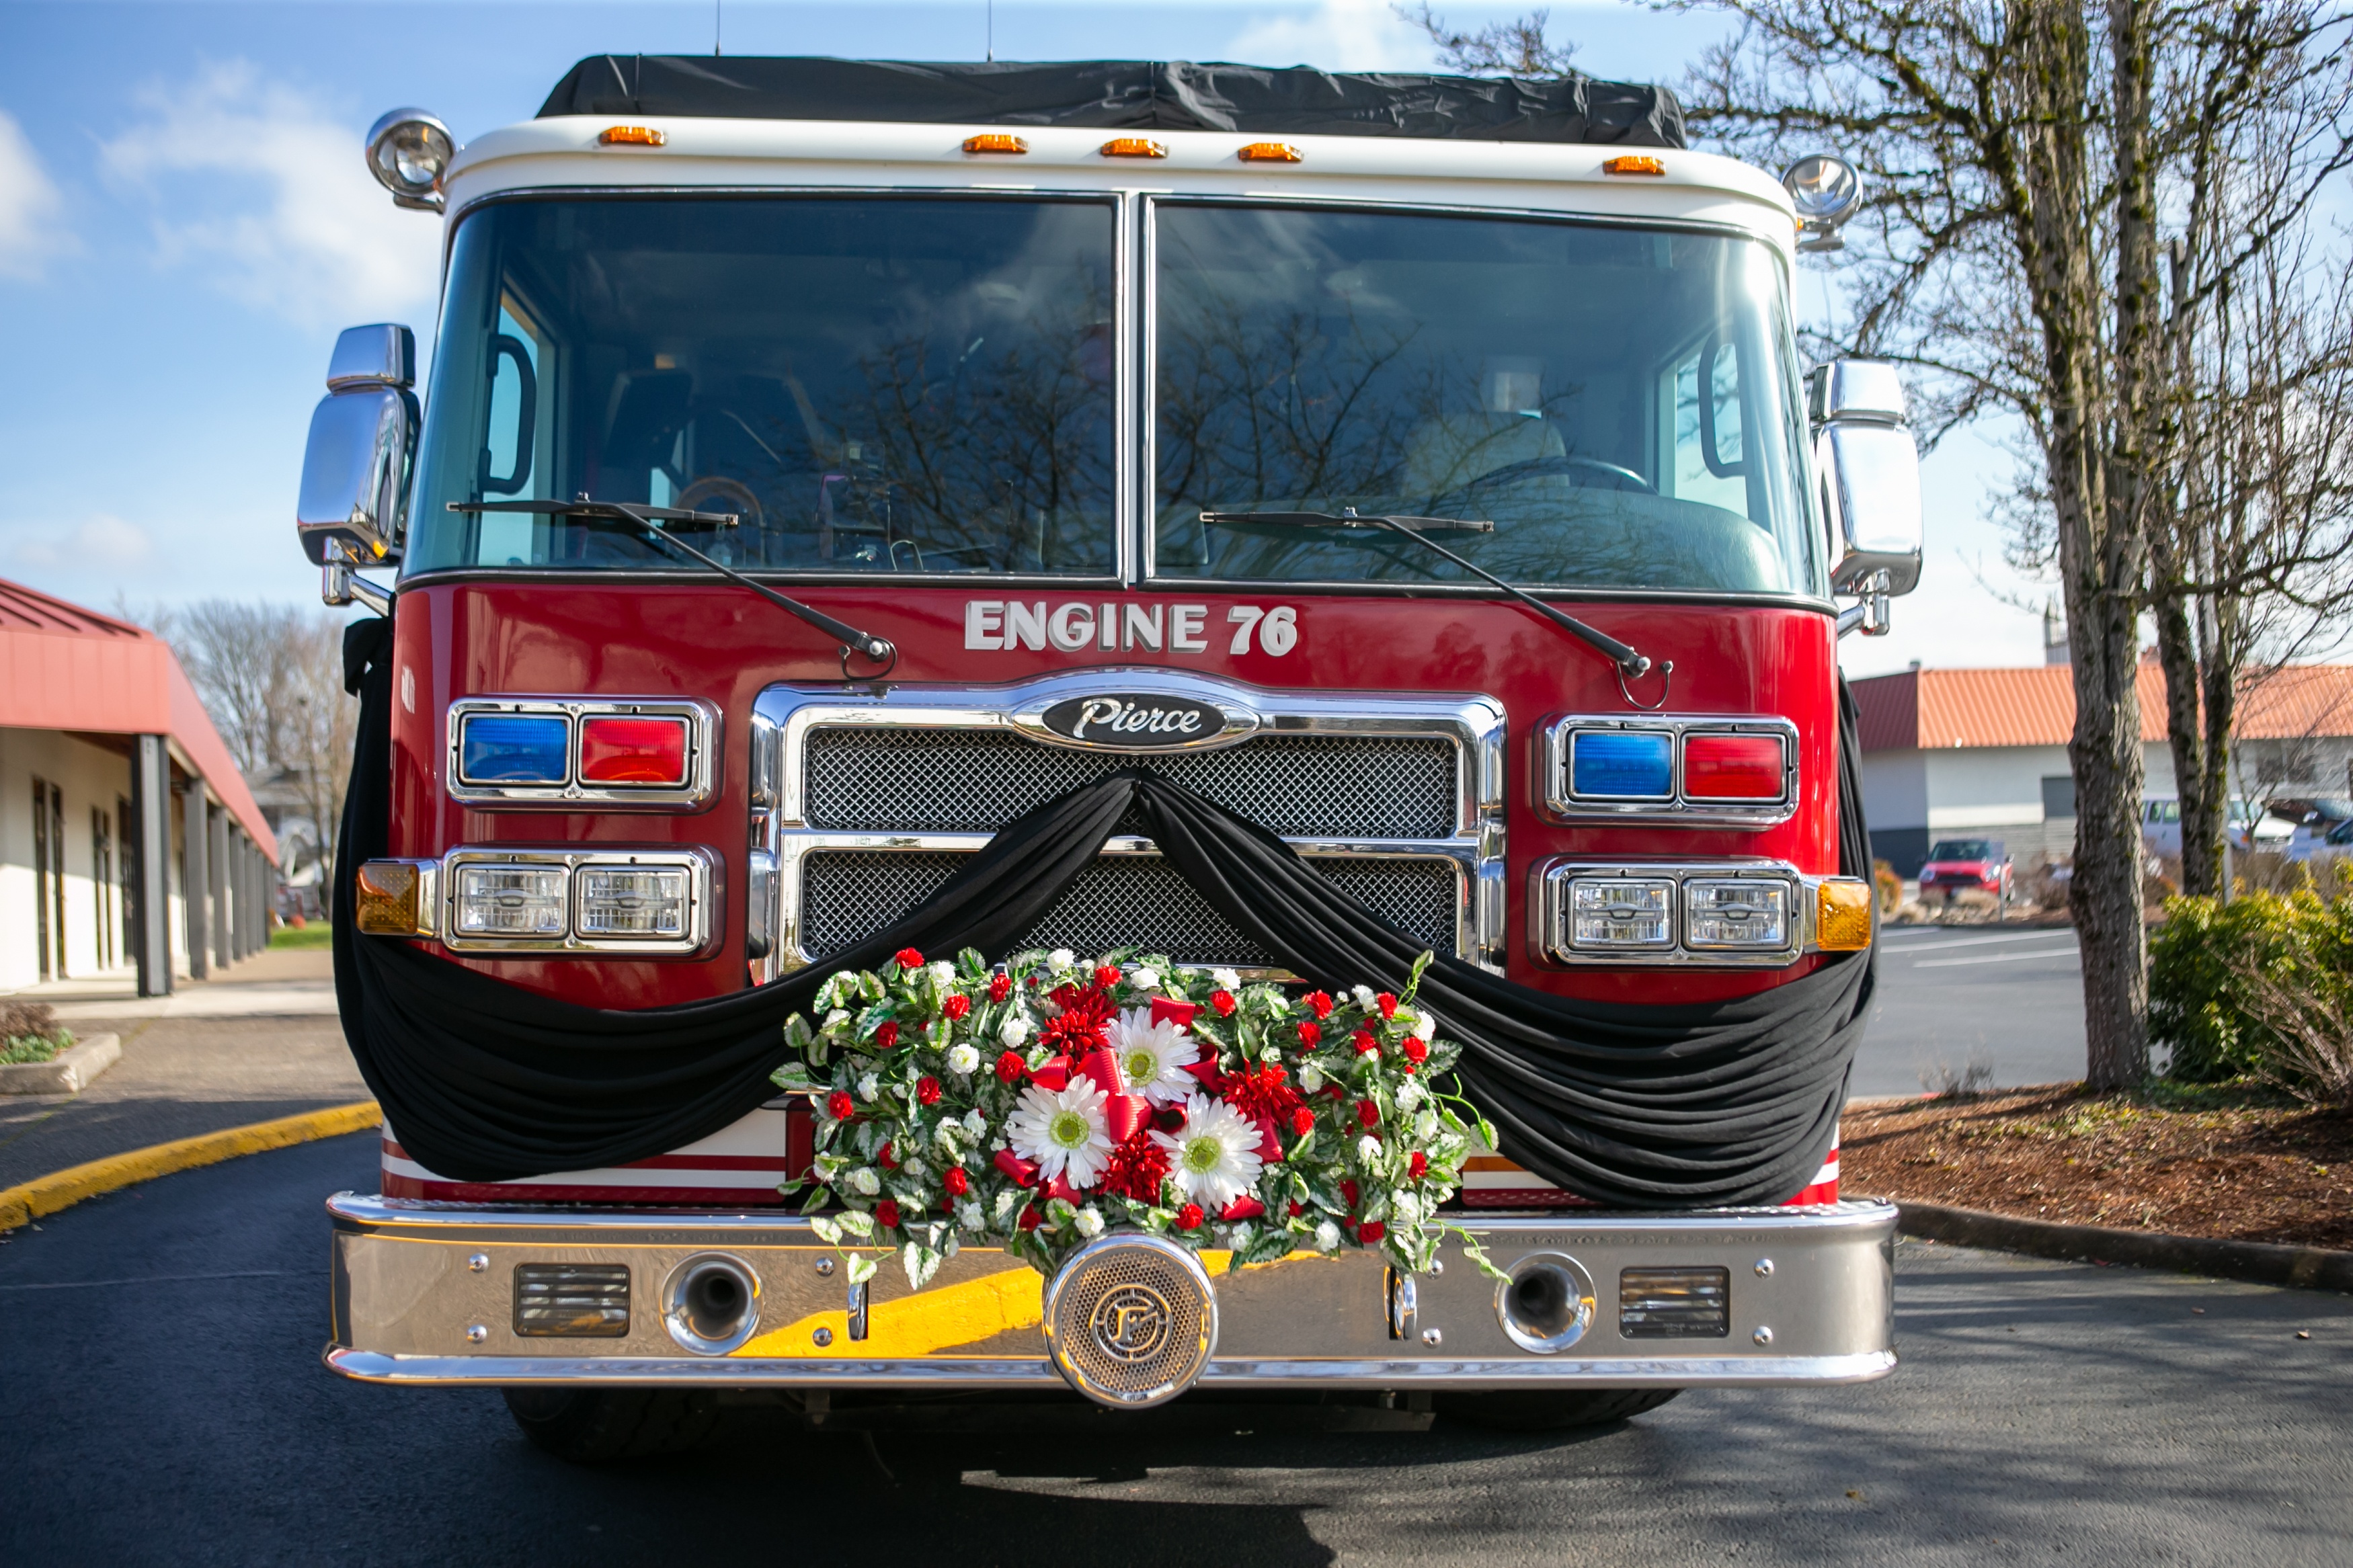 Fire engine No. 76 is adorned with flowers in honor of Gresham Firefighter Brandon Norbury in downtown Gresham, Oregon on Wednesday, Feb. 15 2023.